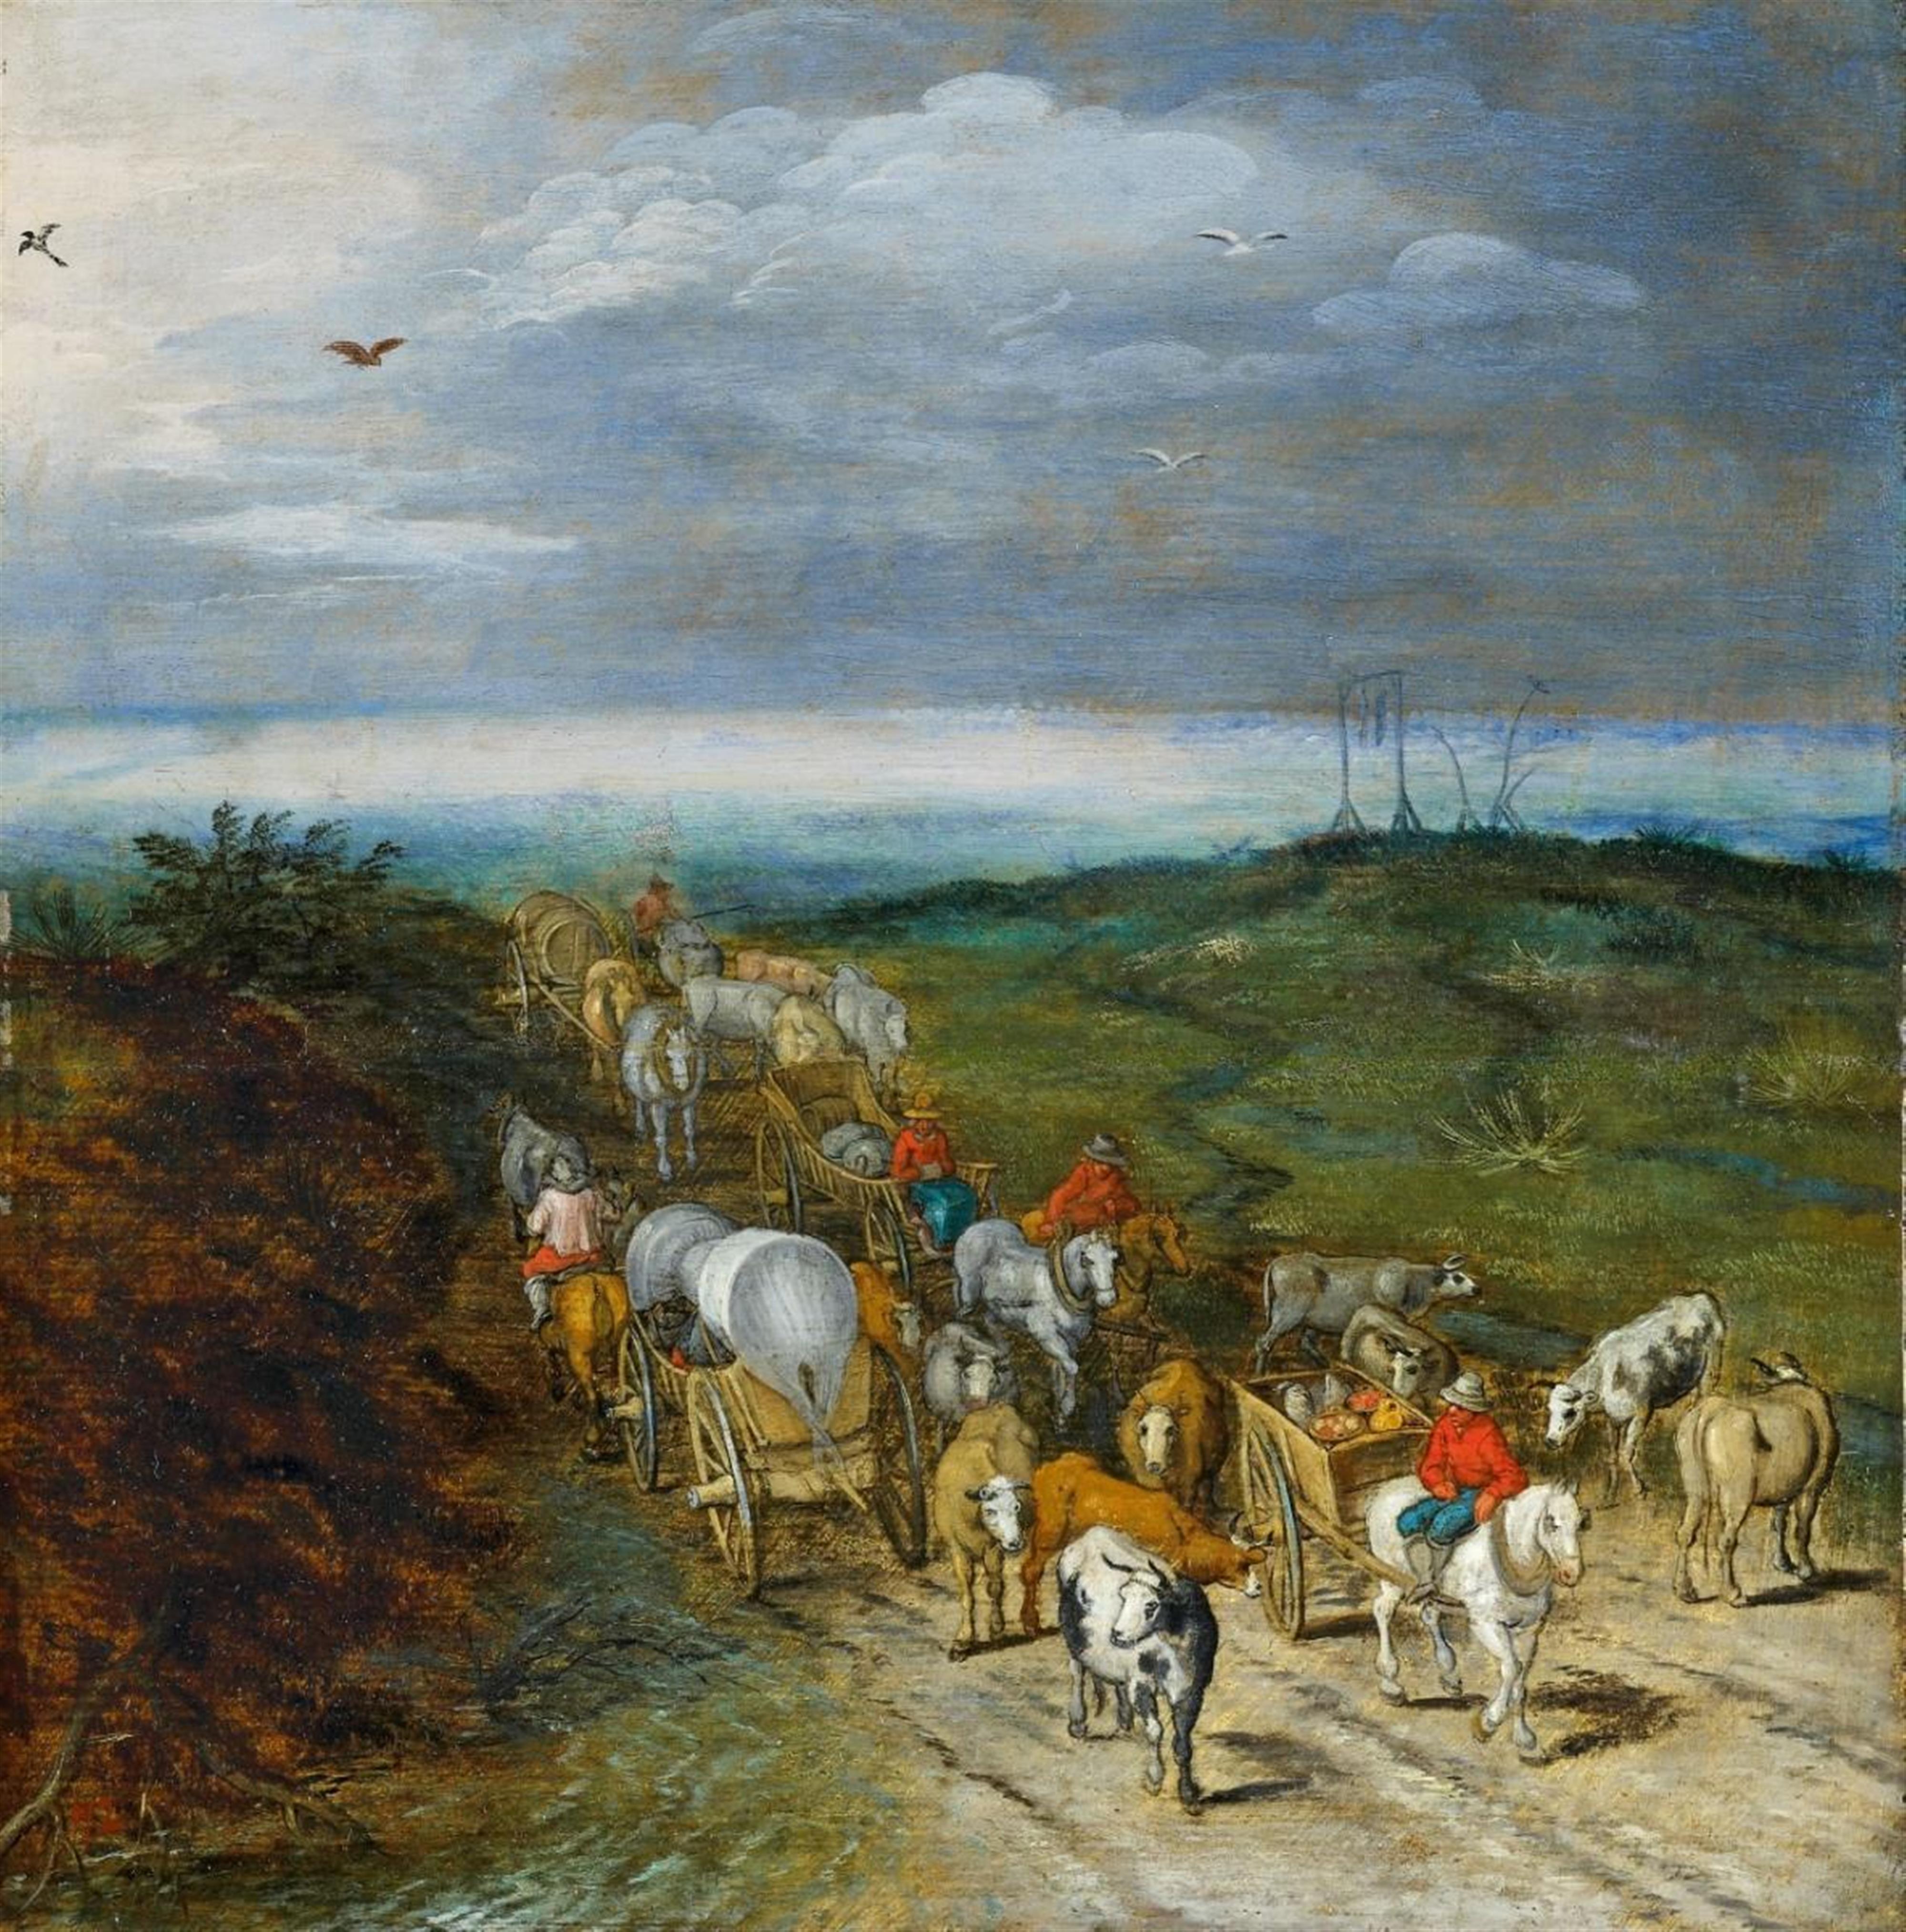 Jan Brueghel the Younger - LANDSCAPE WITH TRAVELLERS AND CATTLE HERD - image-1